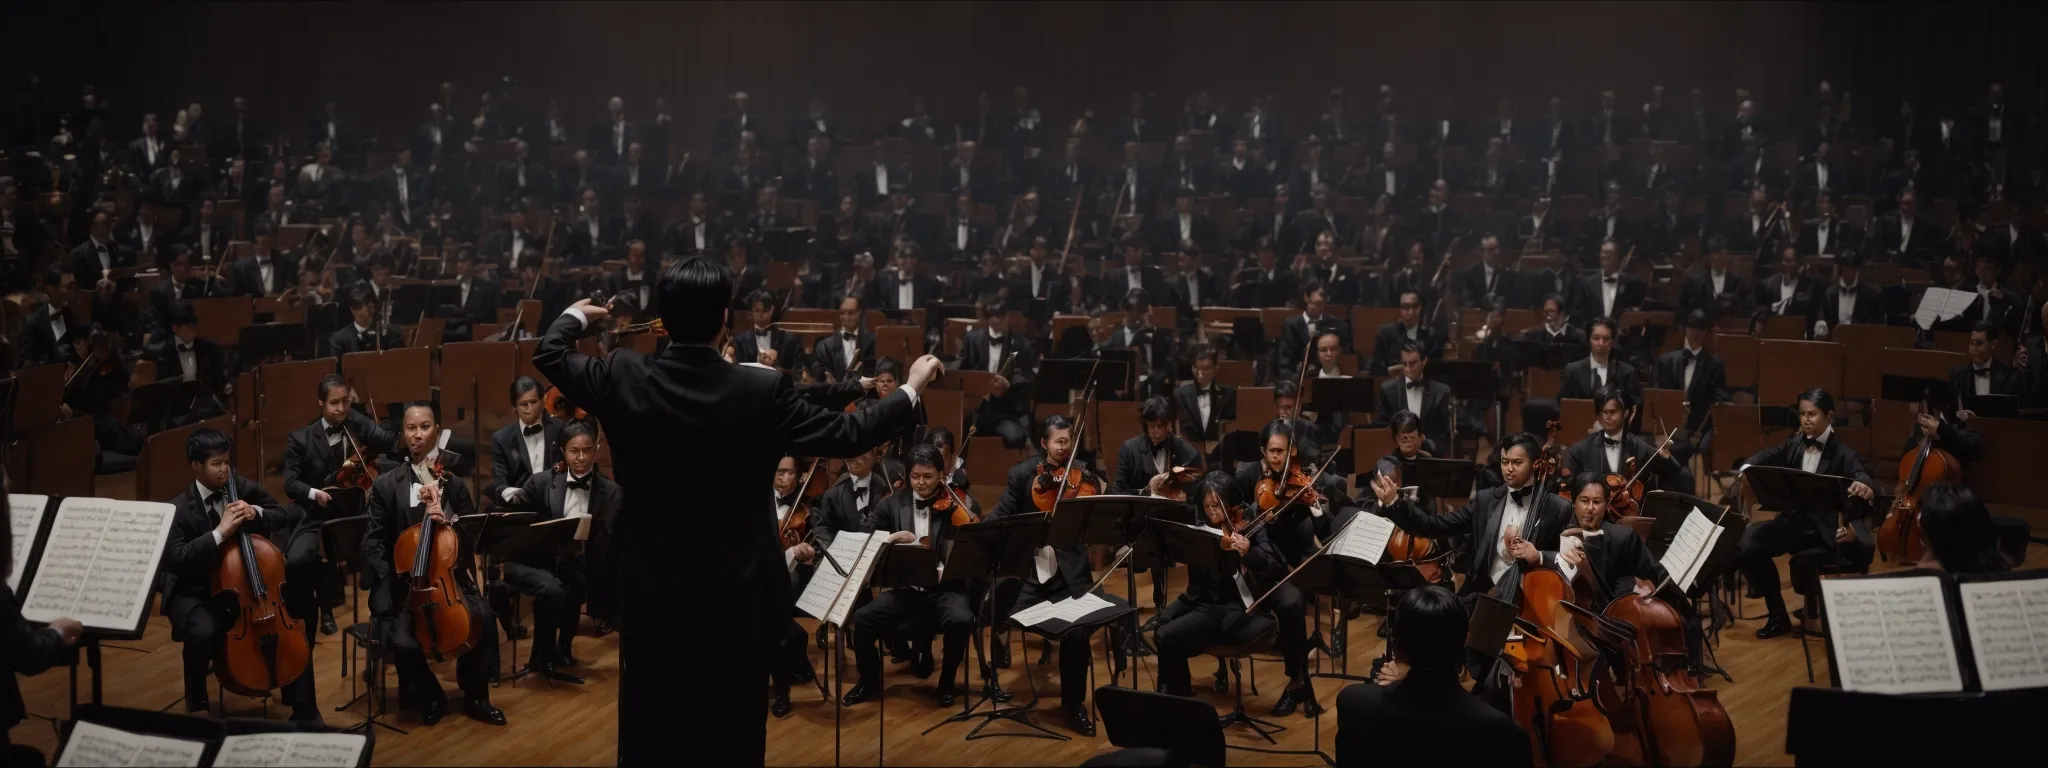 a conductor stands before an orchestra, poised to guide the harmonious blend of instruments.